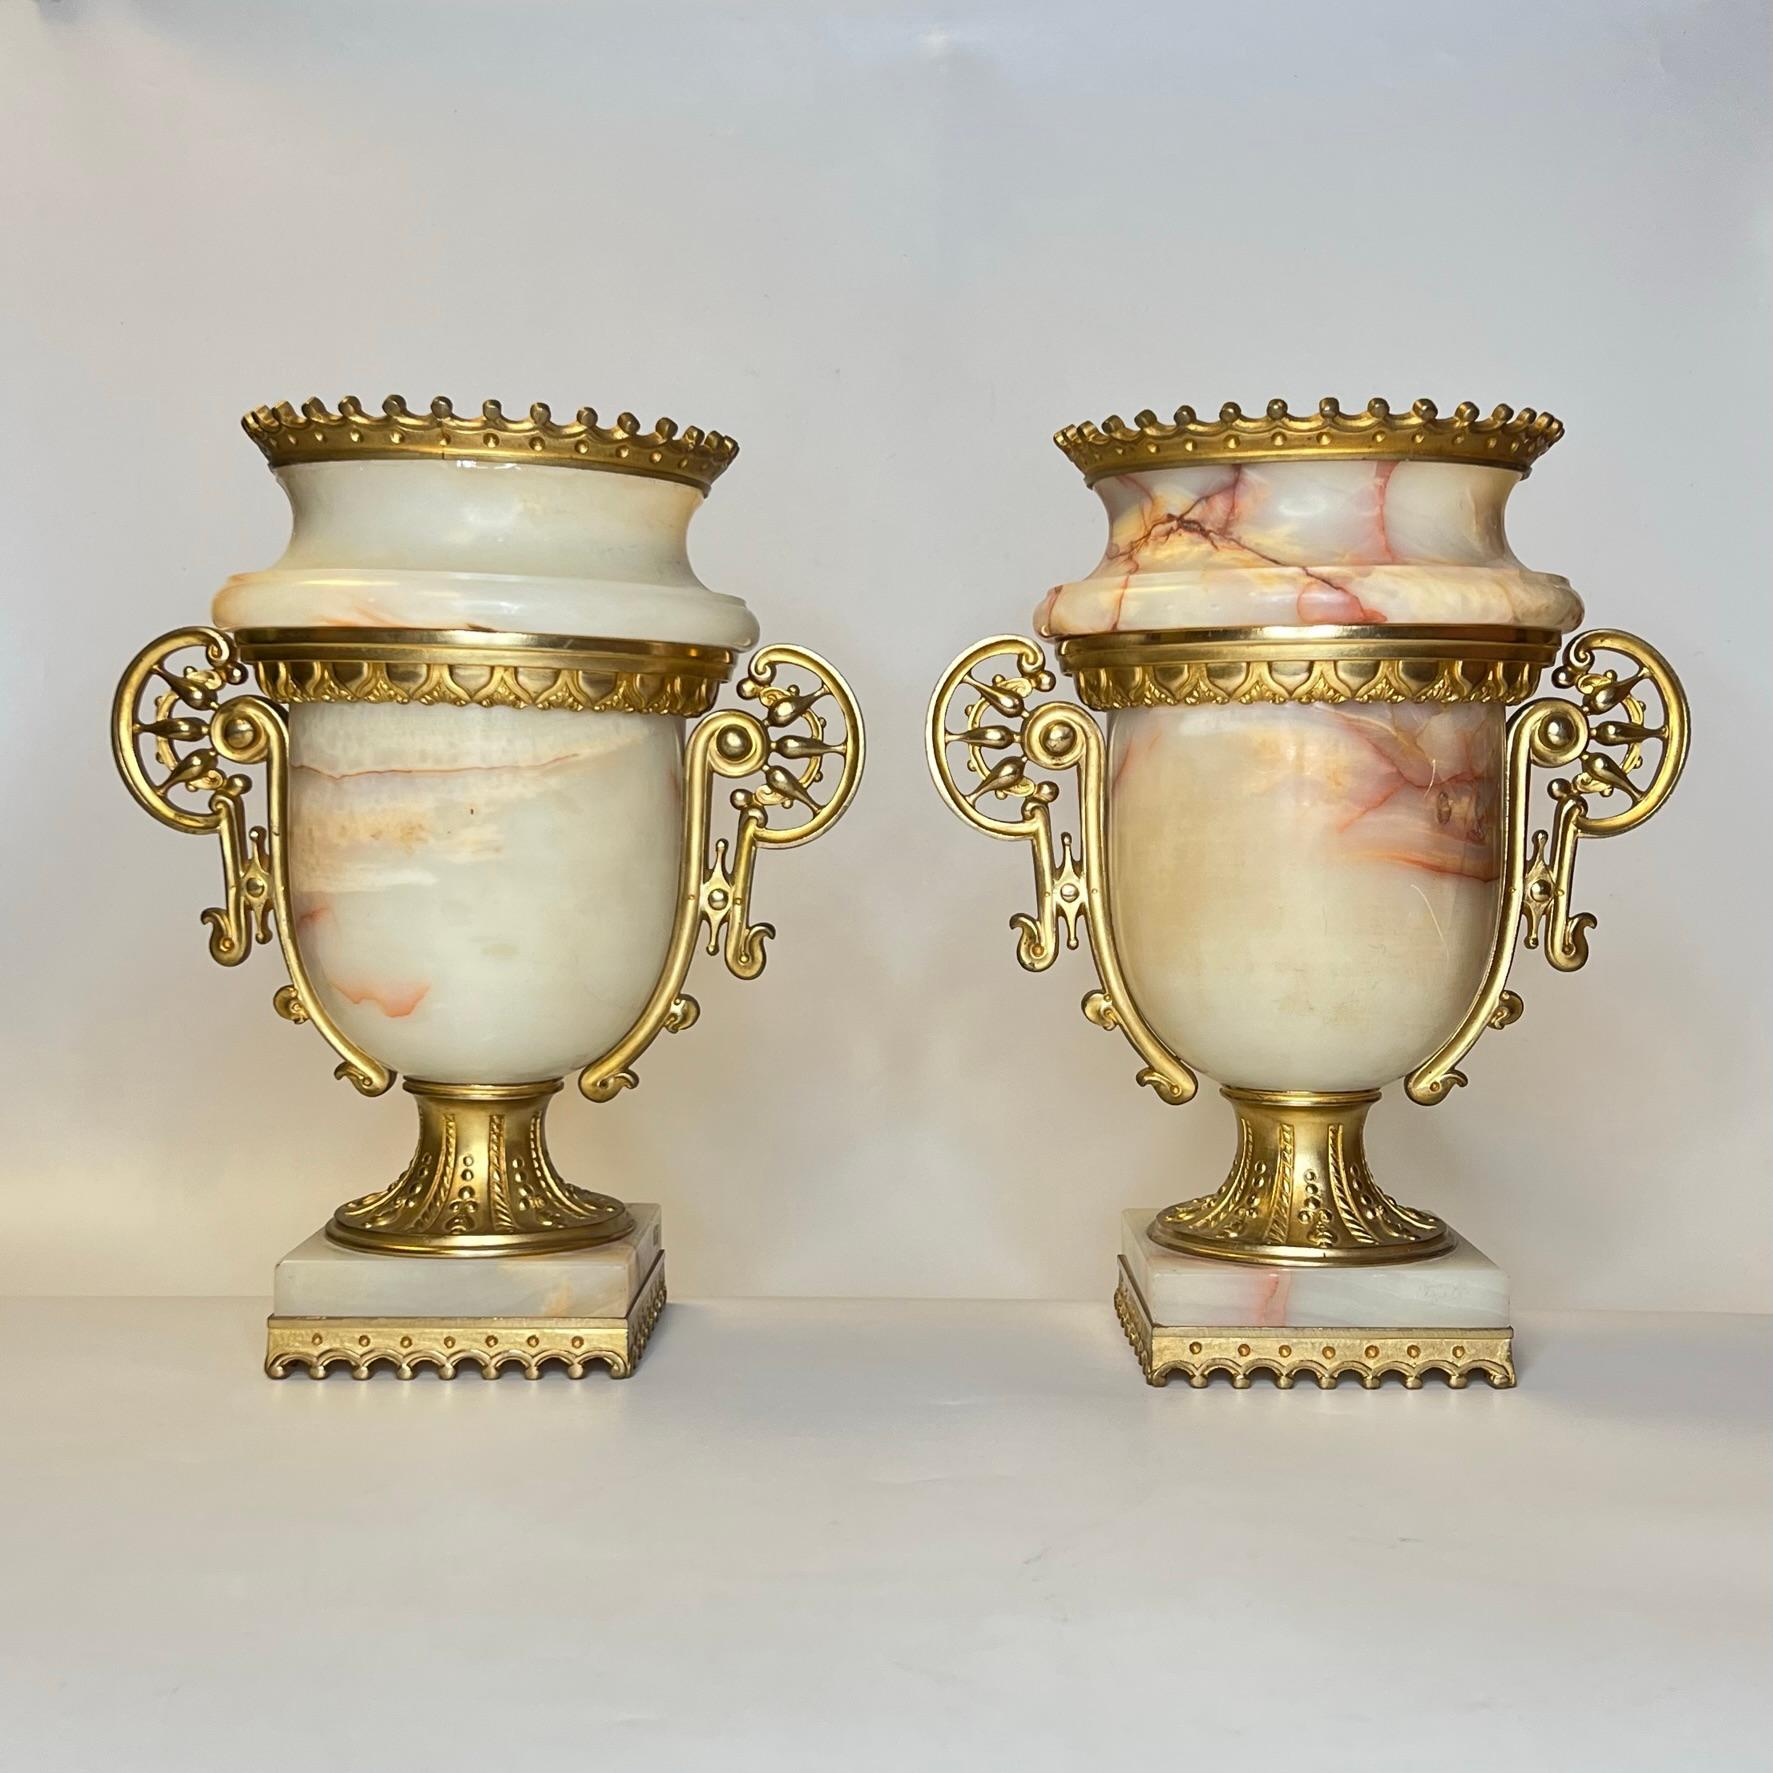 Pair Antique Gilt Bronze Mounted Onyx Urns in Neoclassical Style In Good Condition For Sale In New York, NY